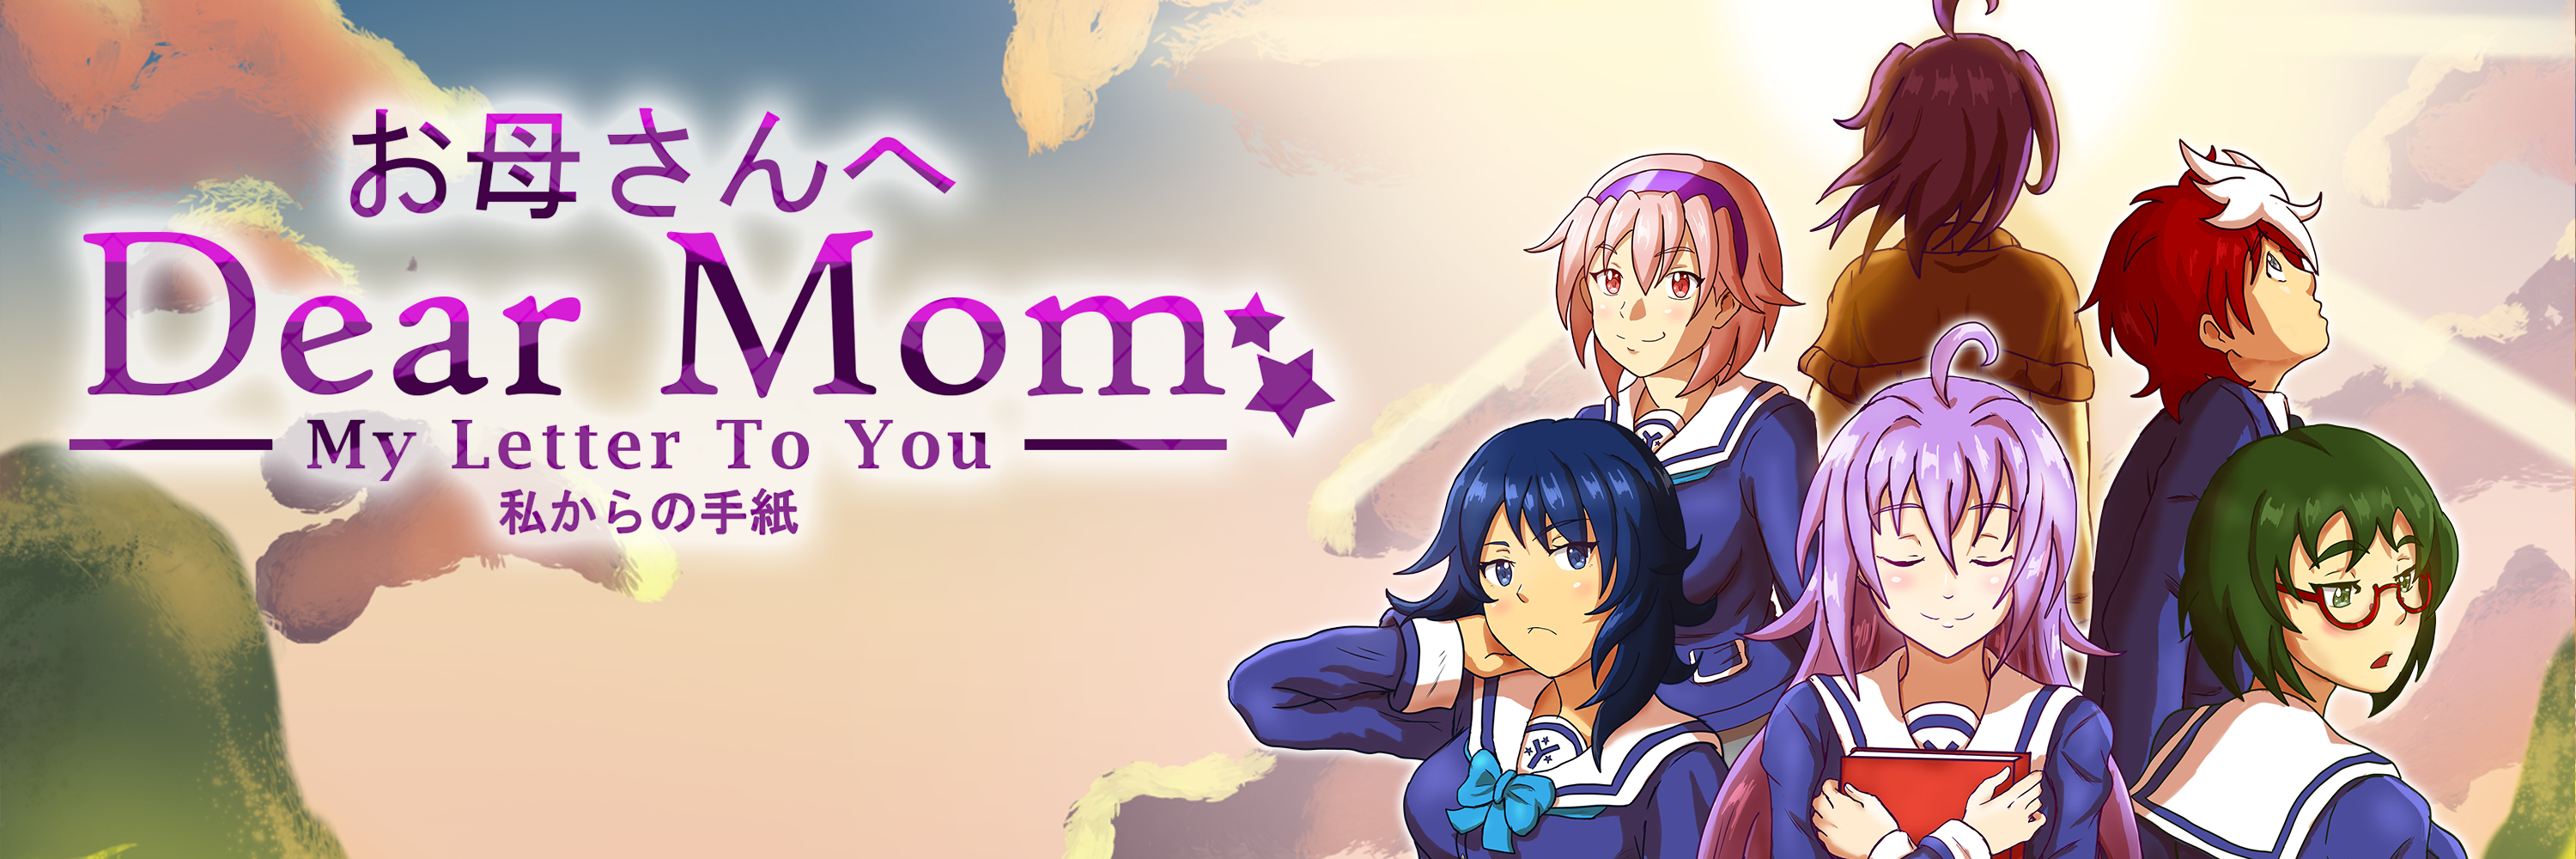 Dear Mom: My Letter to You (Demo)